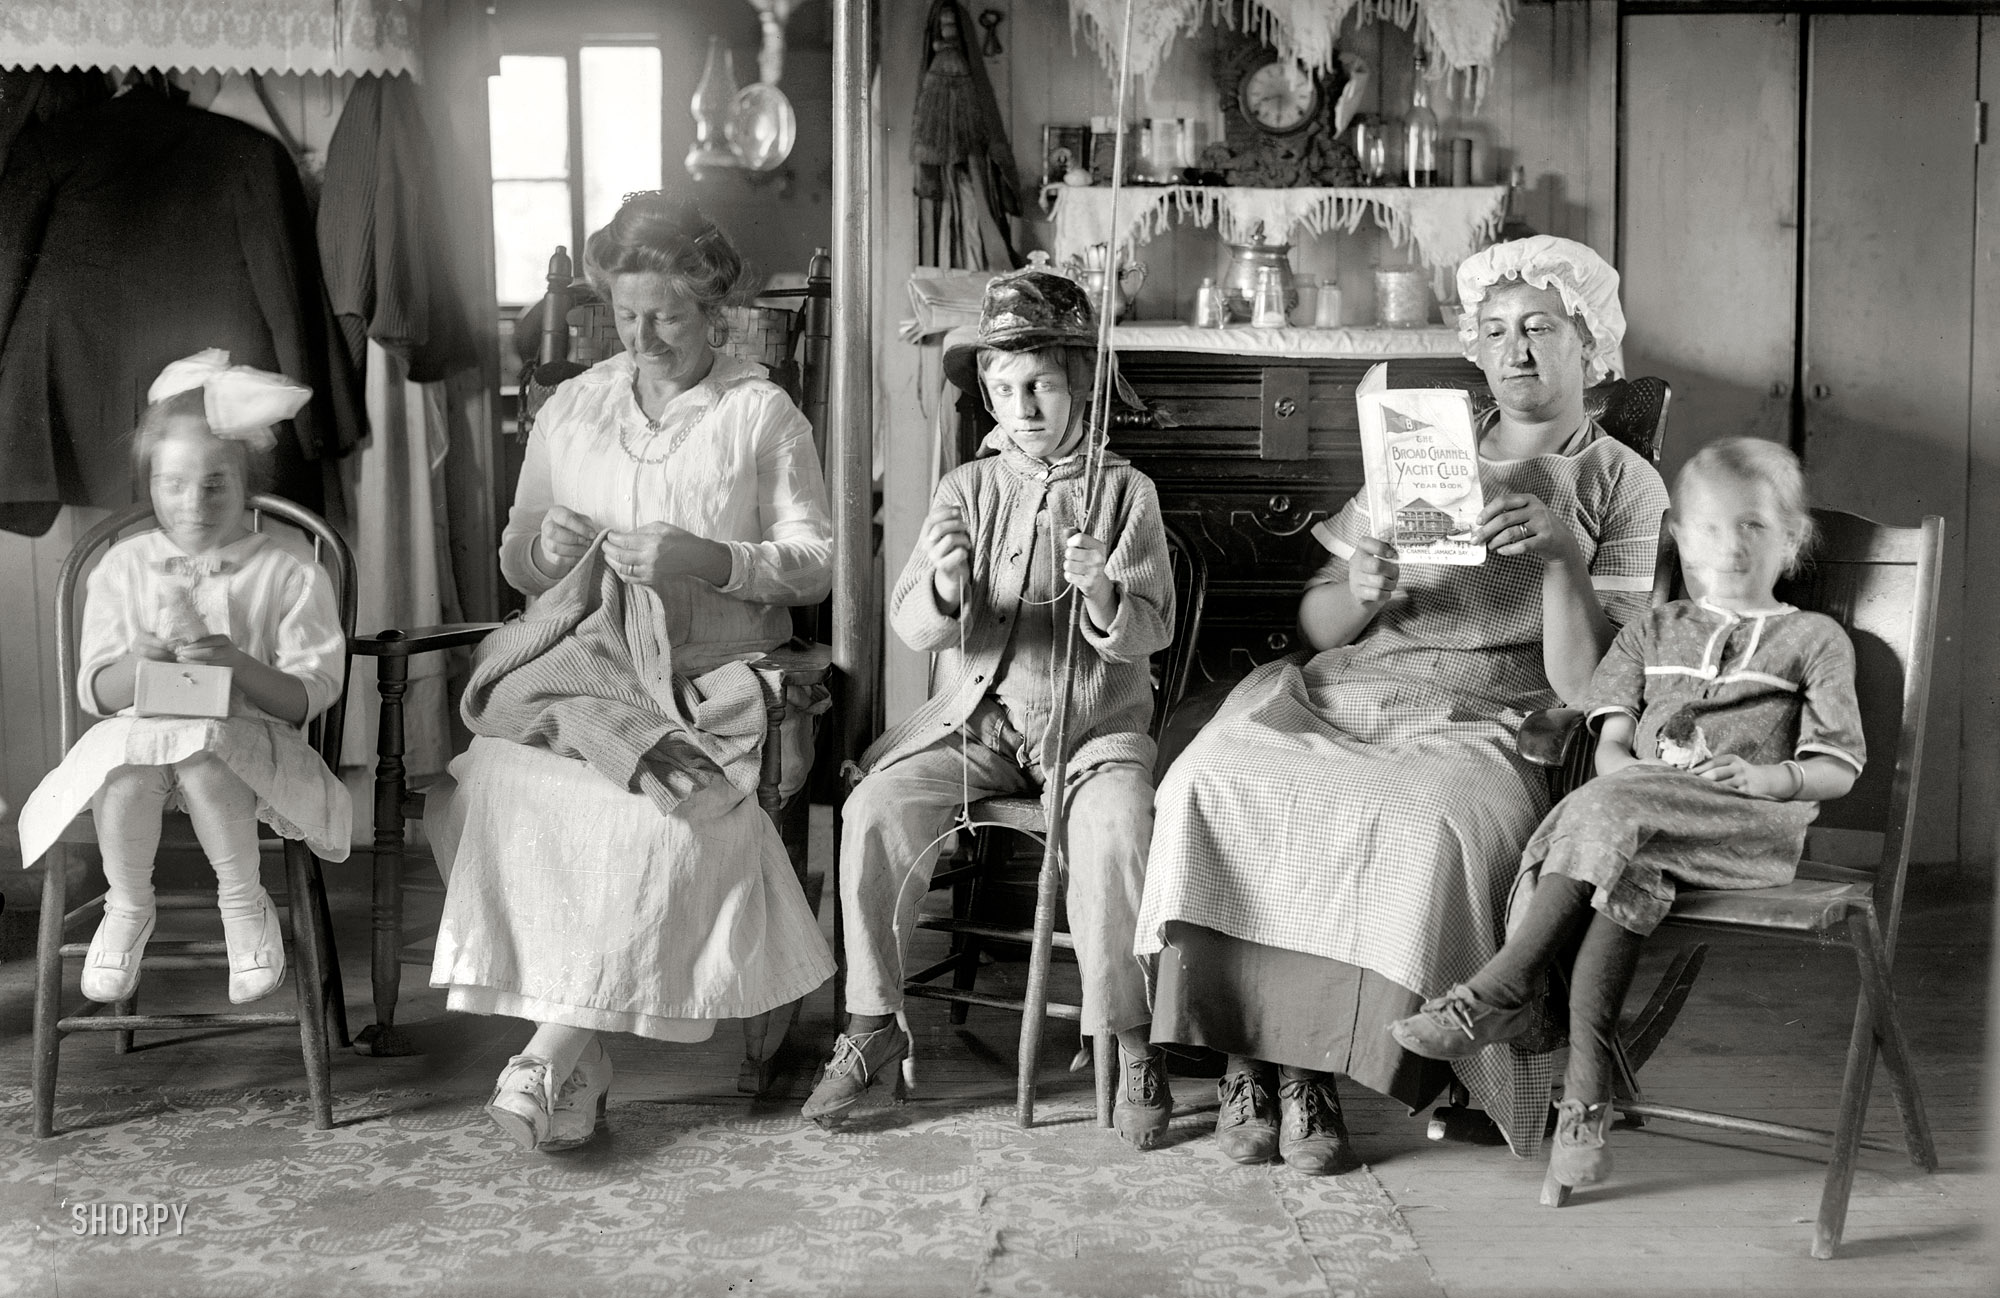 Queens County, New York, circa 1915. "At Broad Channel, in the living room." A cottage in the Jamaica Bay island colony, where the fish are biting and the sweaters need mending. 5x7 glass negative, Bain New Service. View full size.